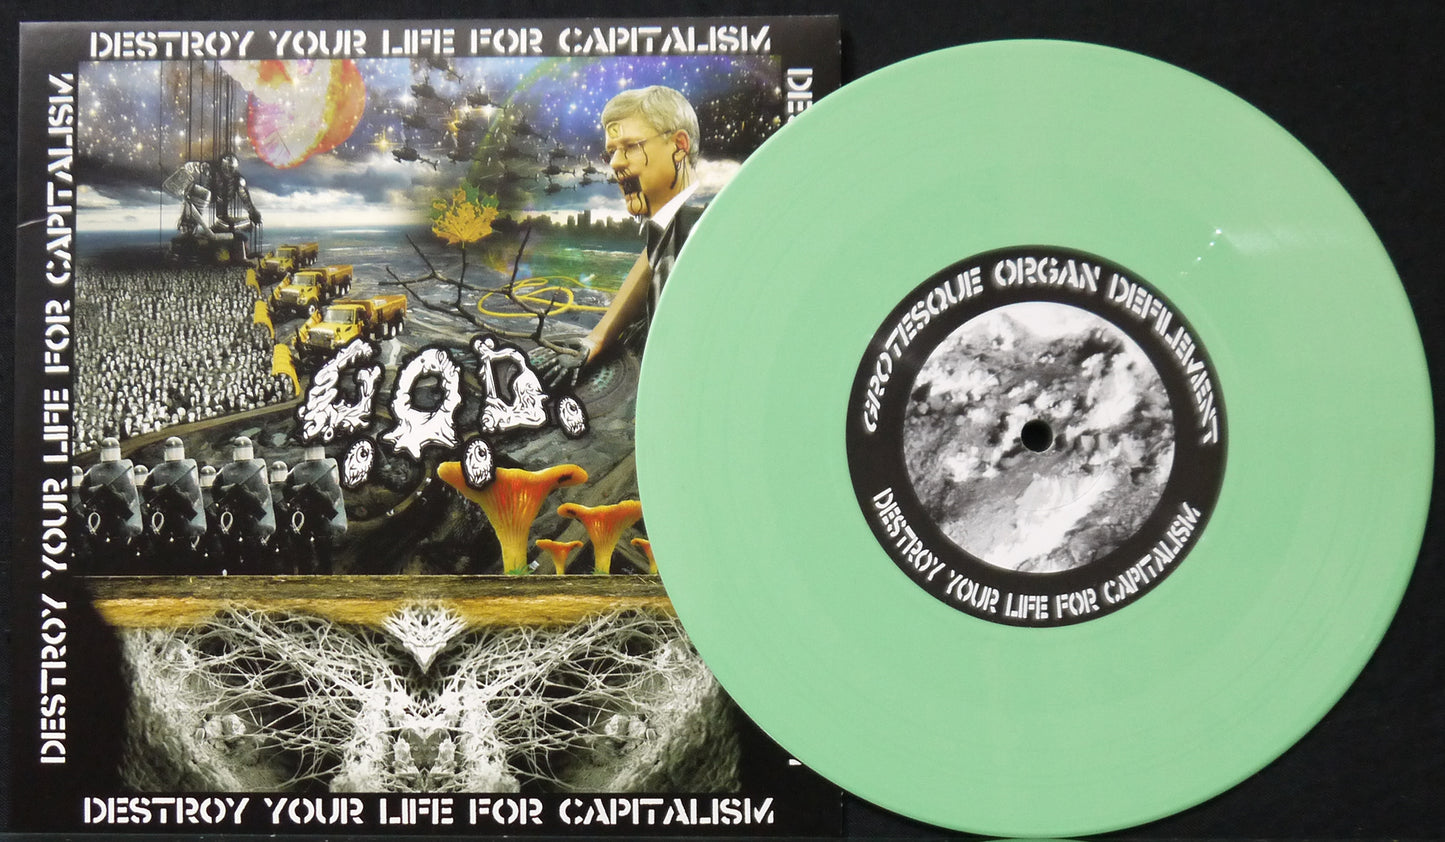 G.O.D. - Destroy Your Life For Capitalism 7"